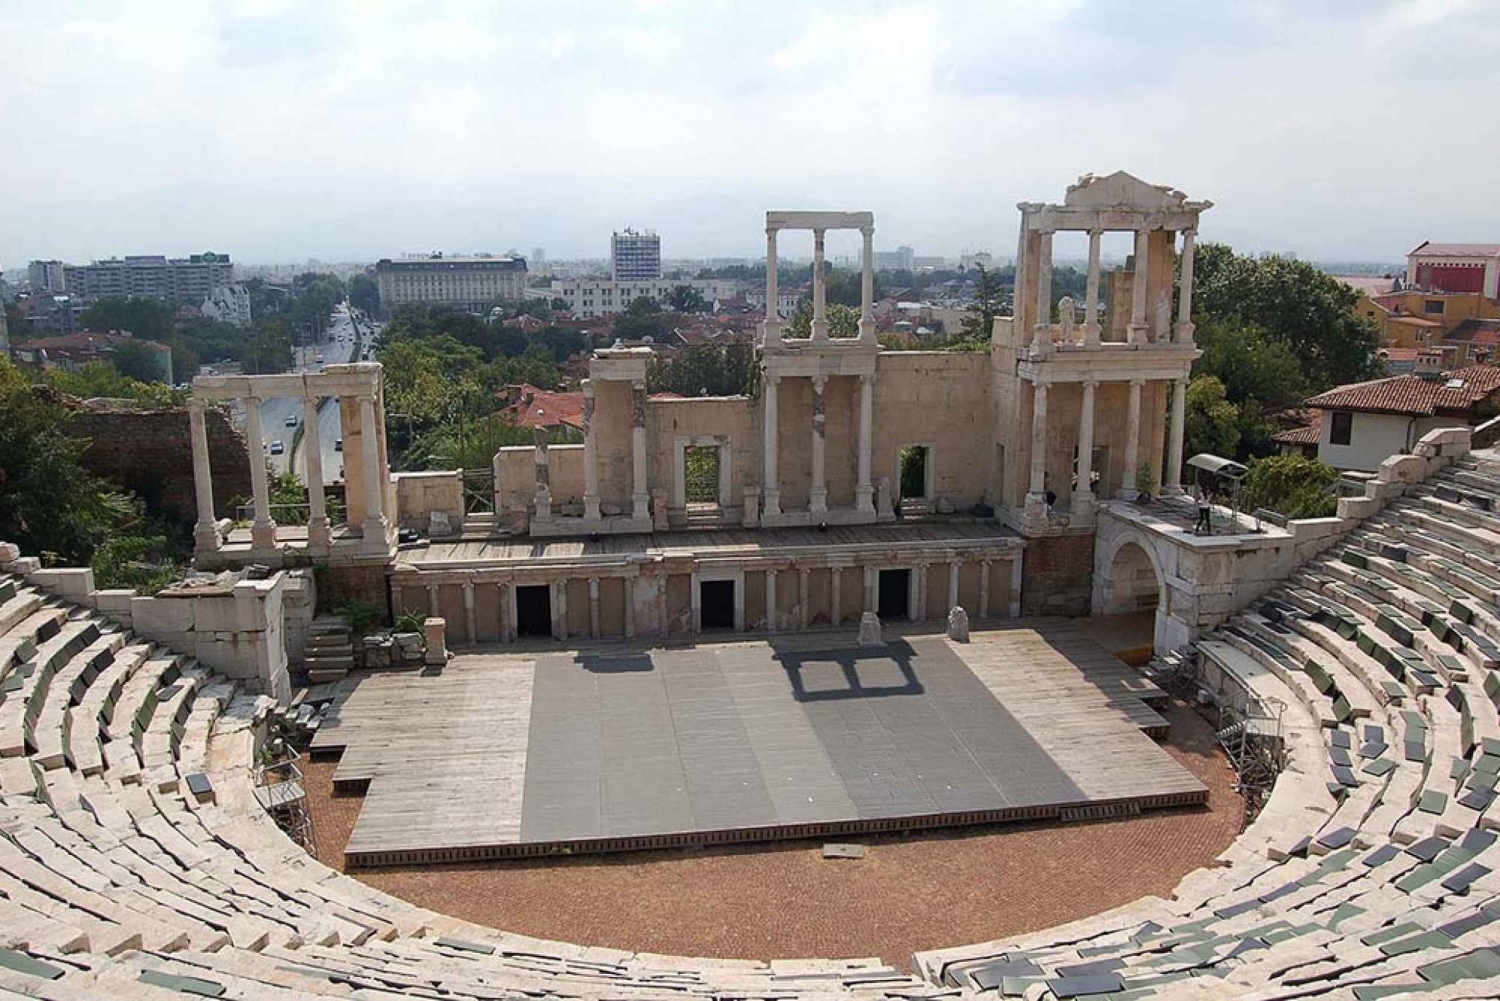 Plovdiv: Full-Day Small Group Excursion from Sofia